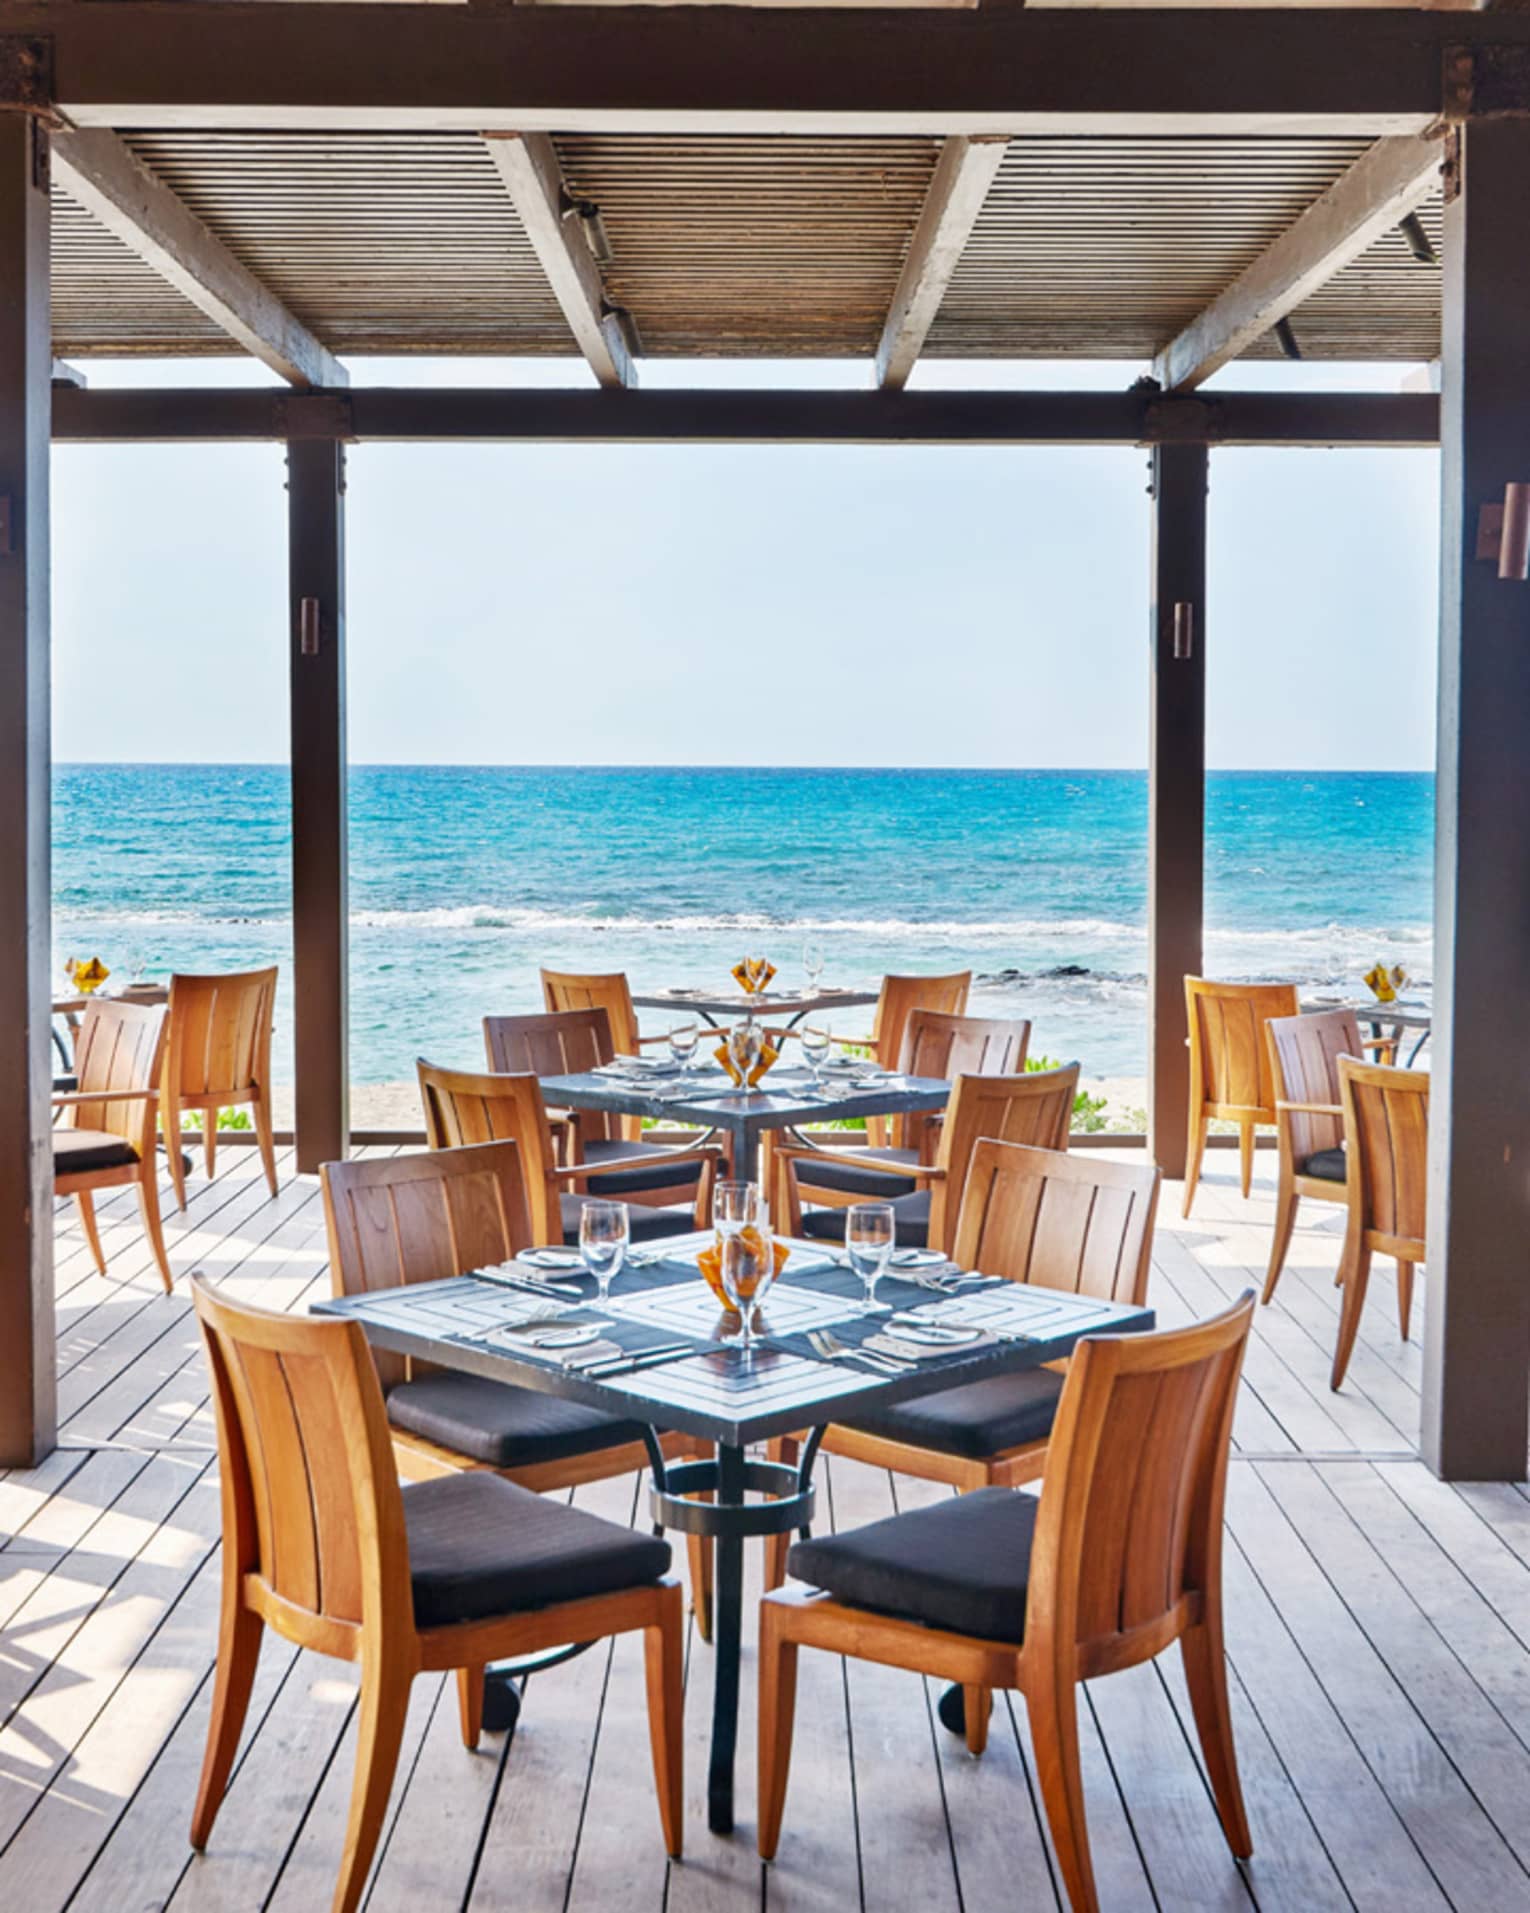  The Ulu Ocean Grill and Sushi Lounge is ready for guests with square tables set with menus and clear glassware, and overlooking the ocean from the covered wooden terrace. 